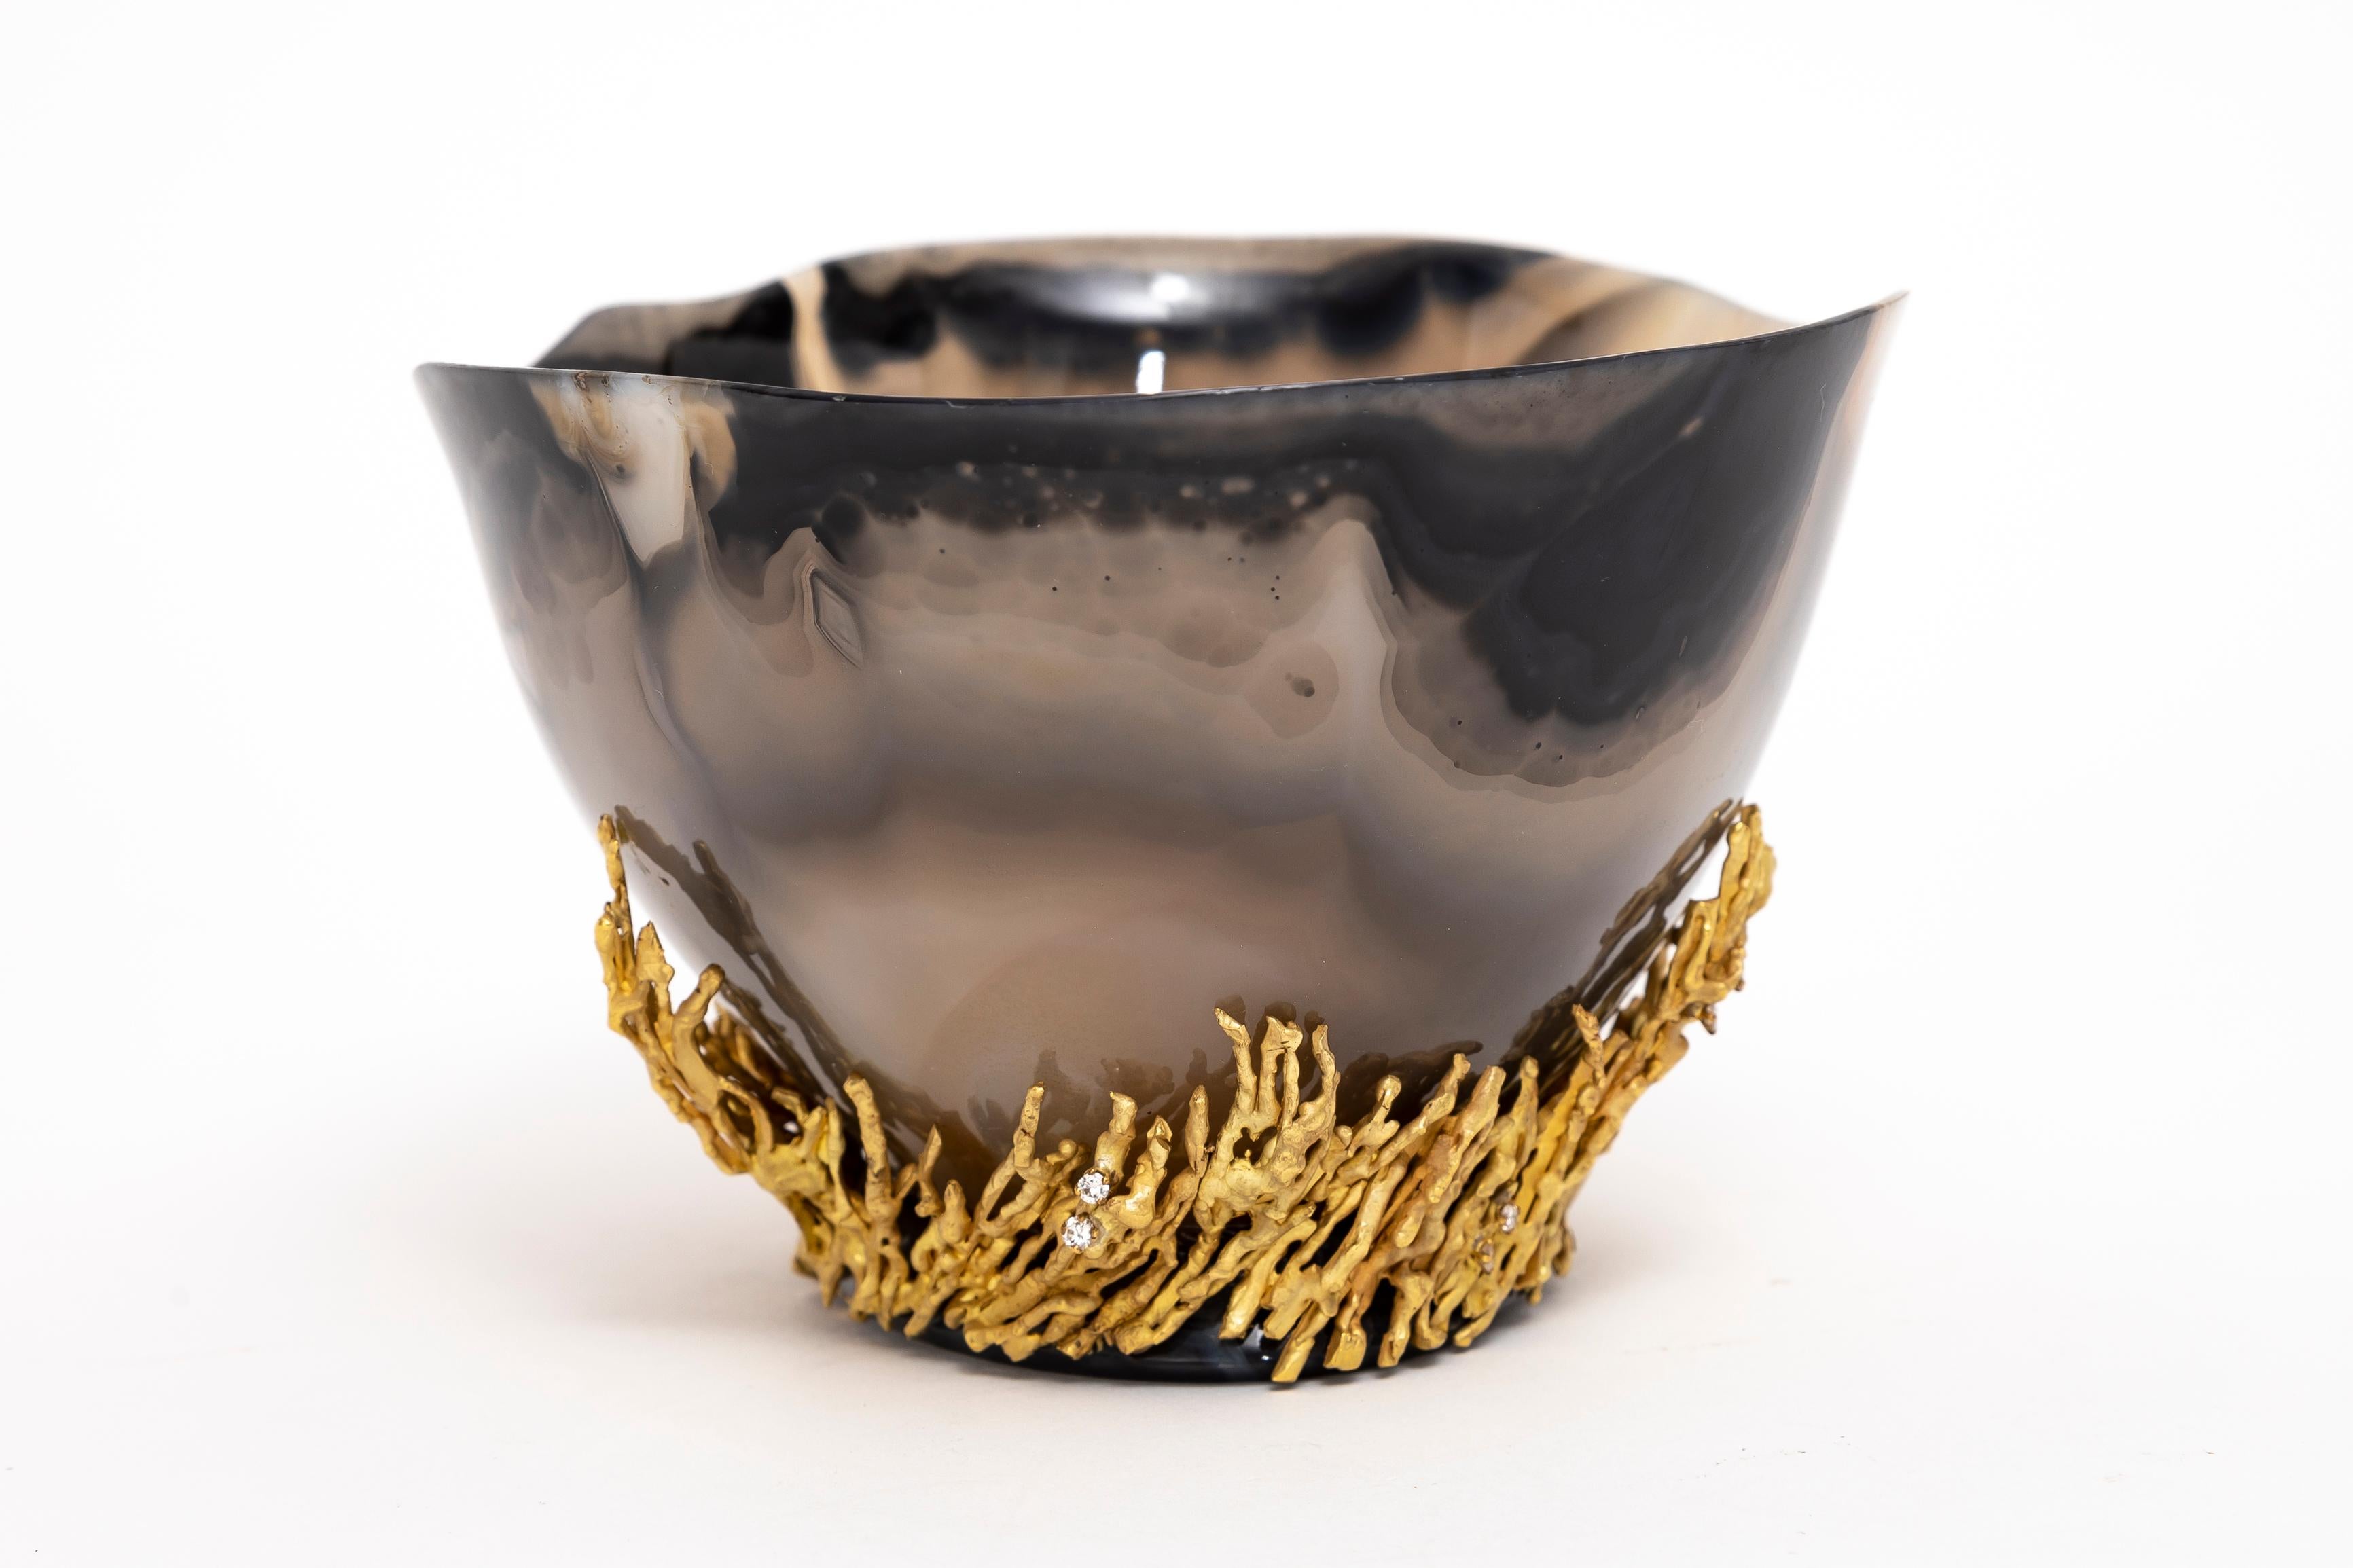 Precious Stone An Incredible Chaumet Paris Gold & Diamond Mounted Carved Agate Bowl For Sale